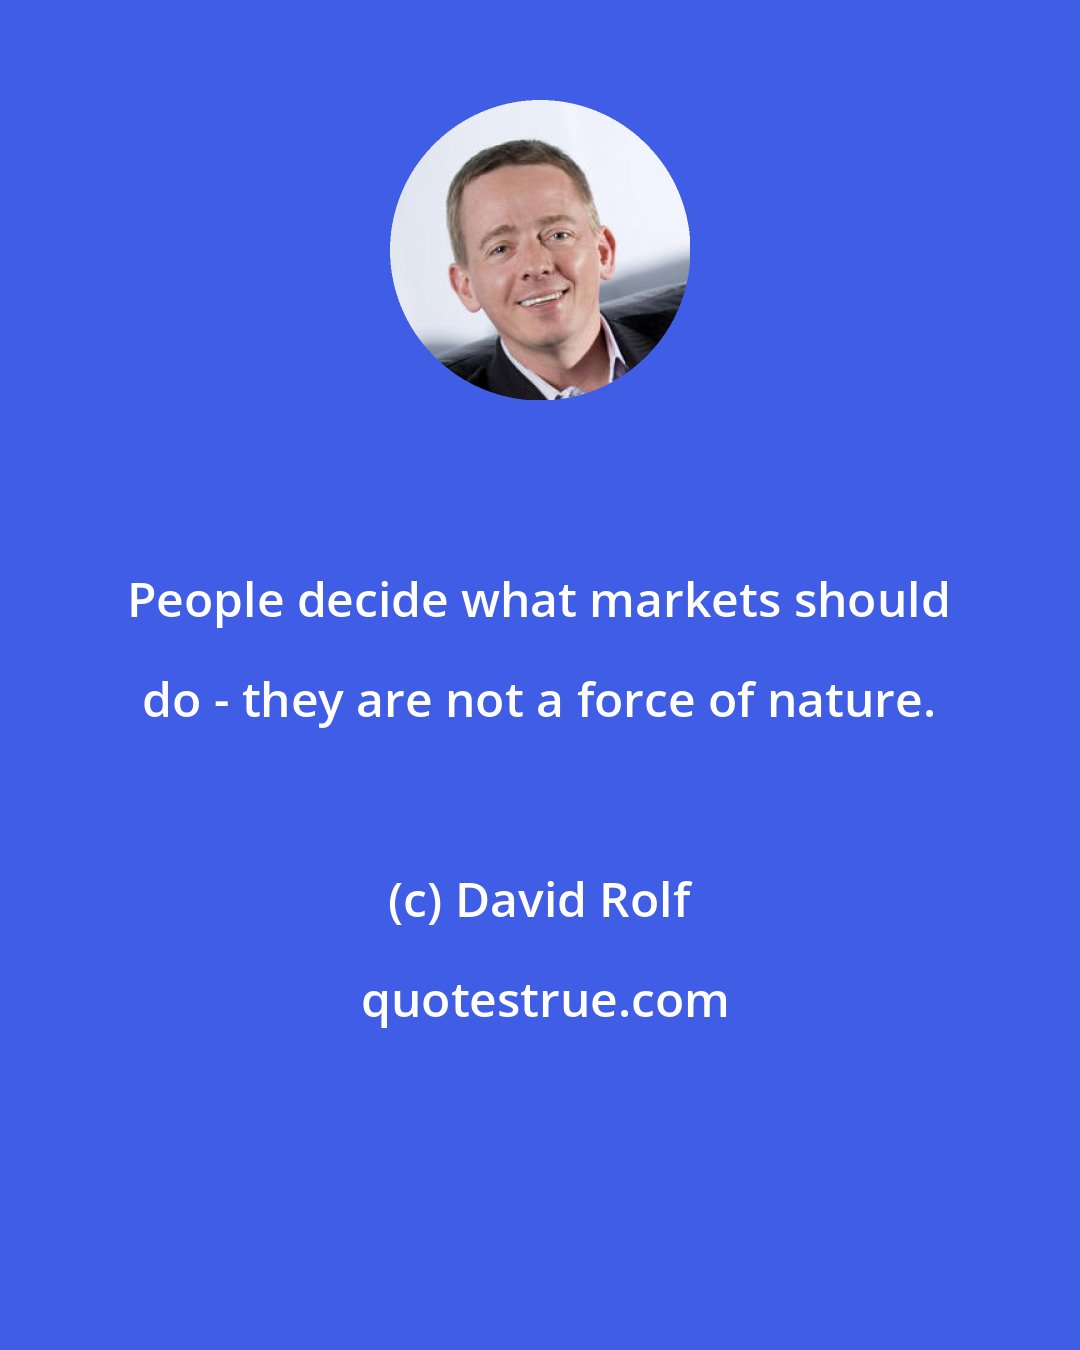 David Rolf: People decide what markets should do - they are not a force of nature.